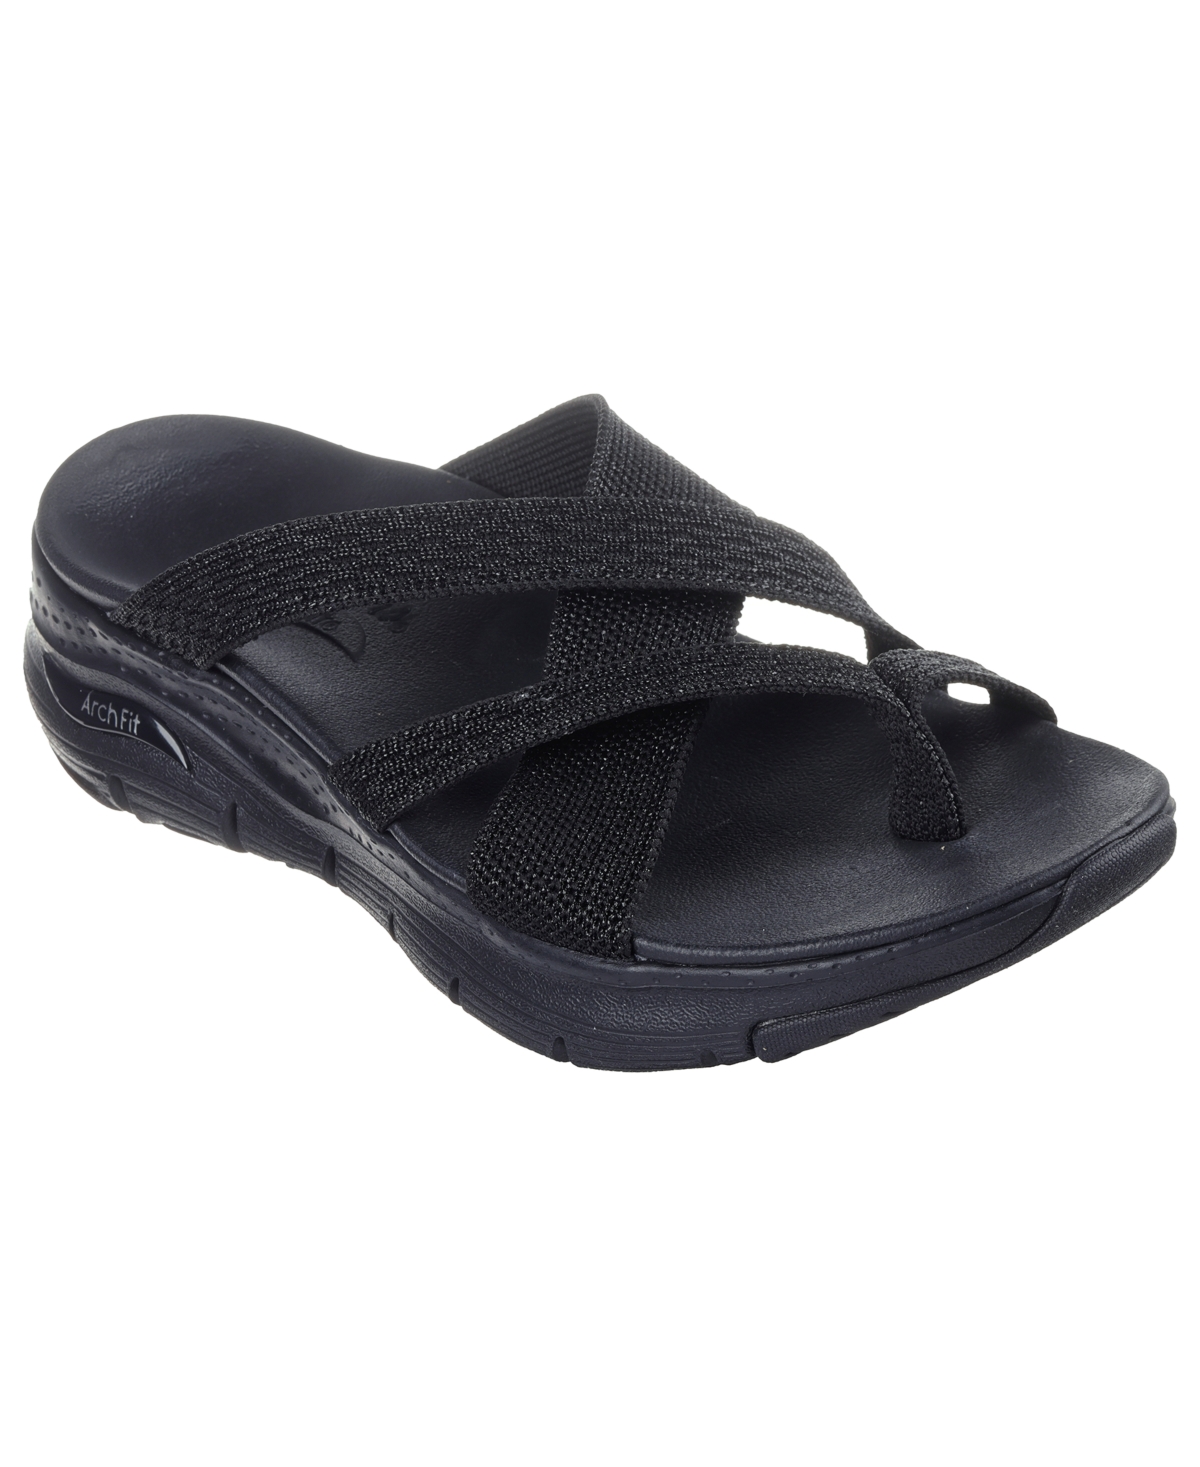 Women's Cali Arch Fit Flip-Flop Thong Sandals from Finish Line - Black